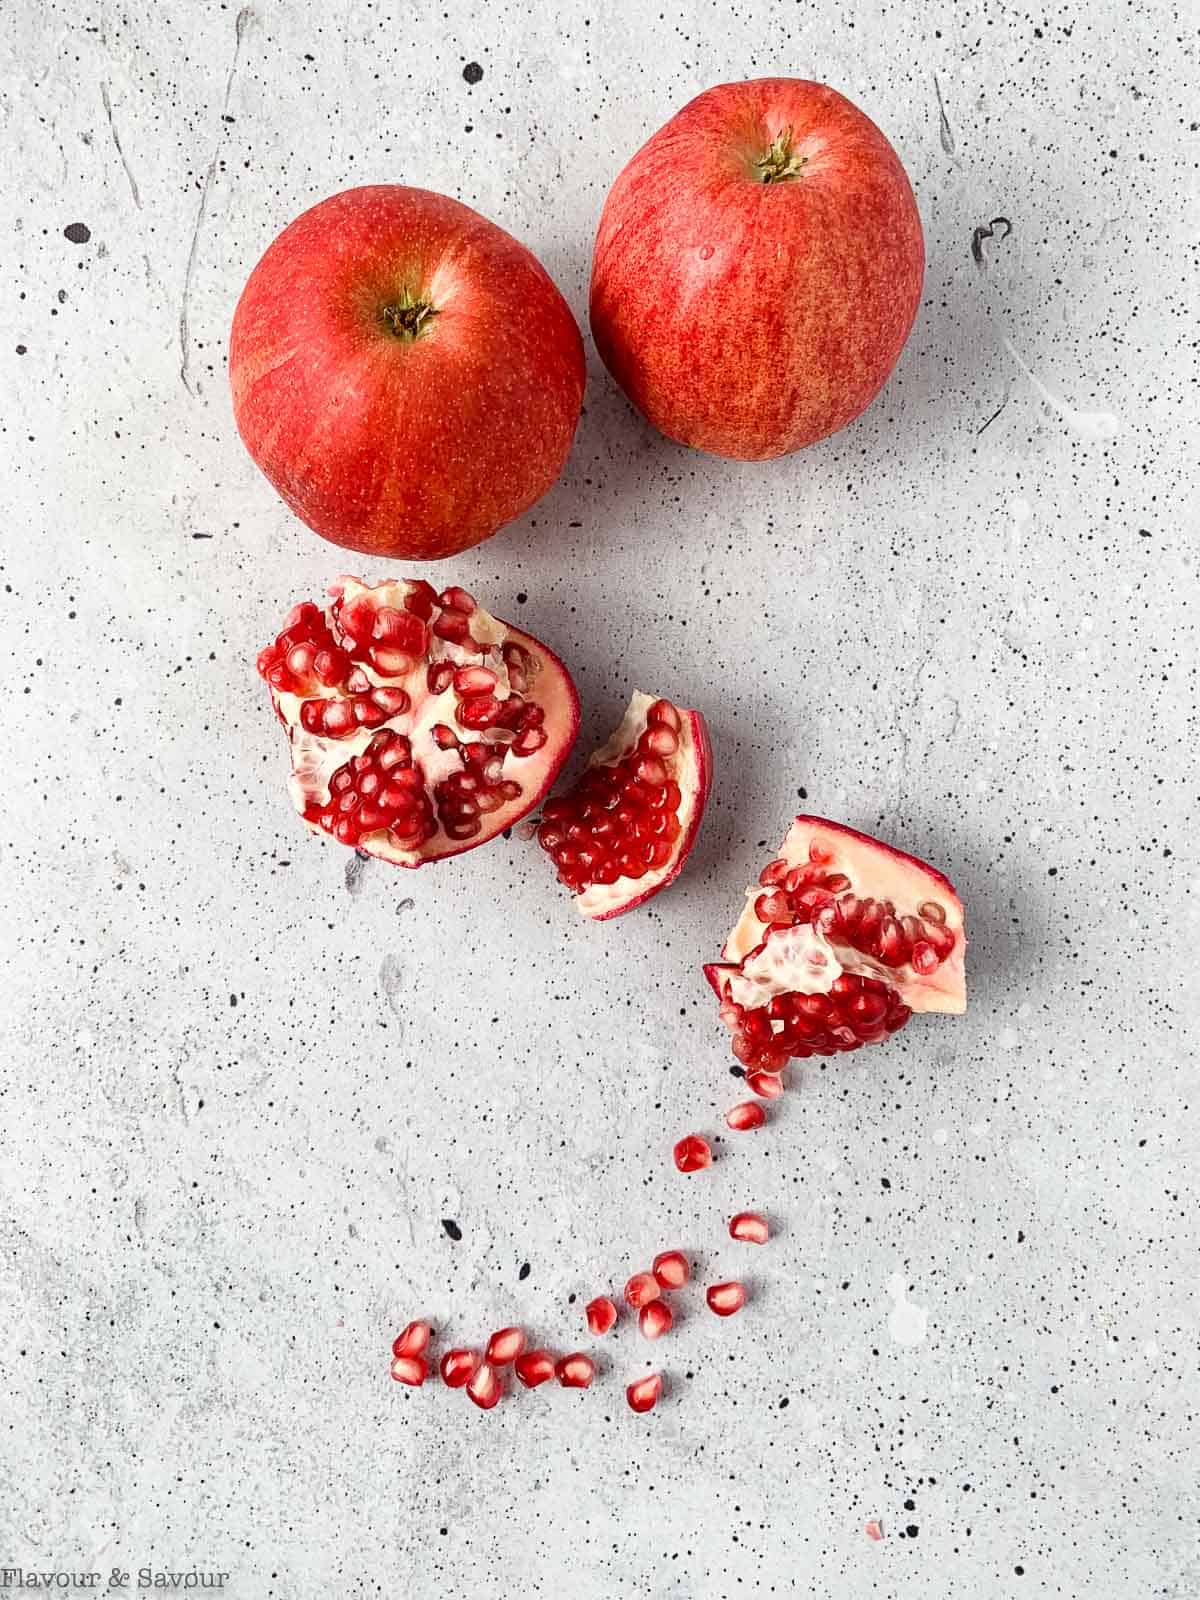 apples and an opened pomegranate as ingredients for Apple Pomegranate Crumble Bars